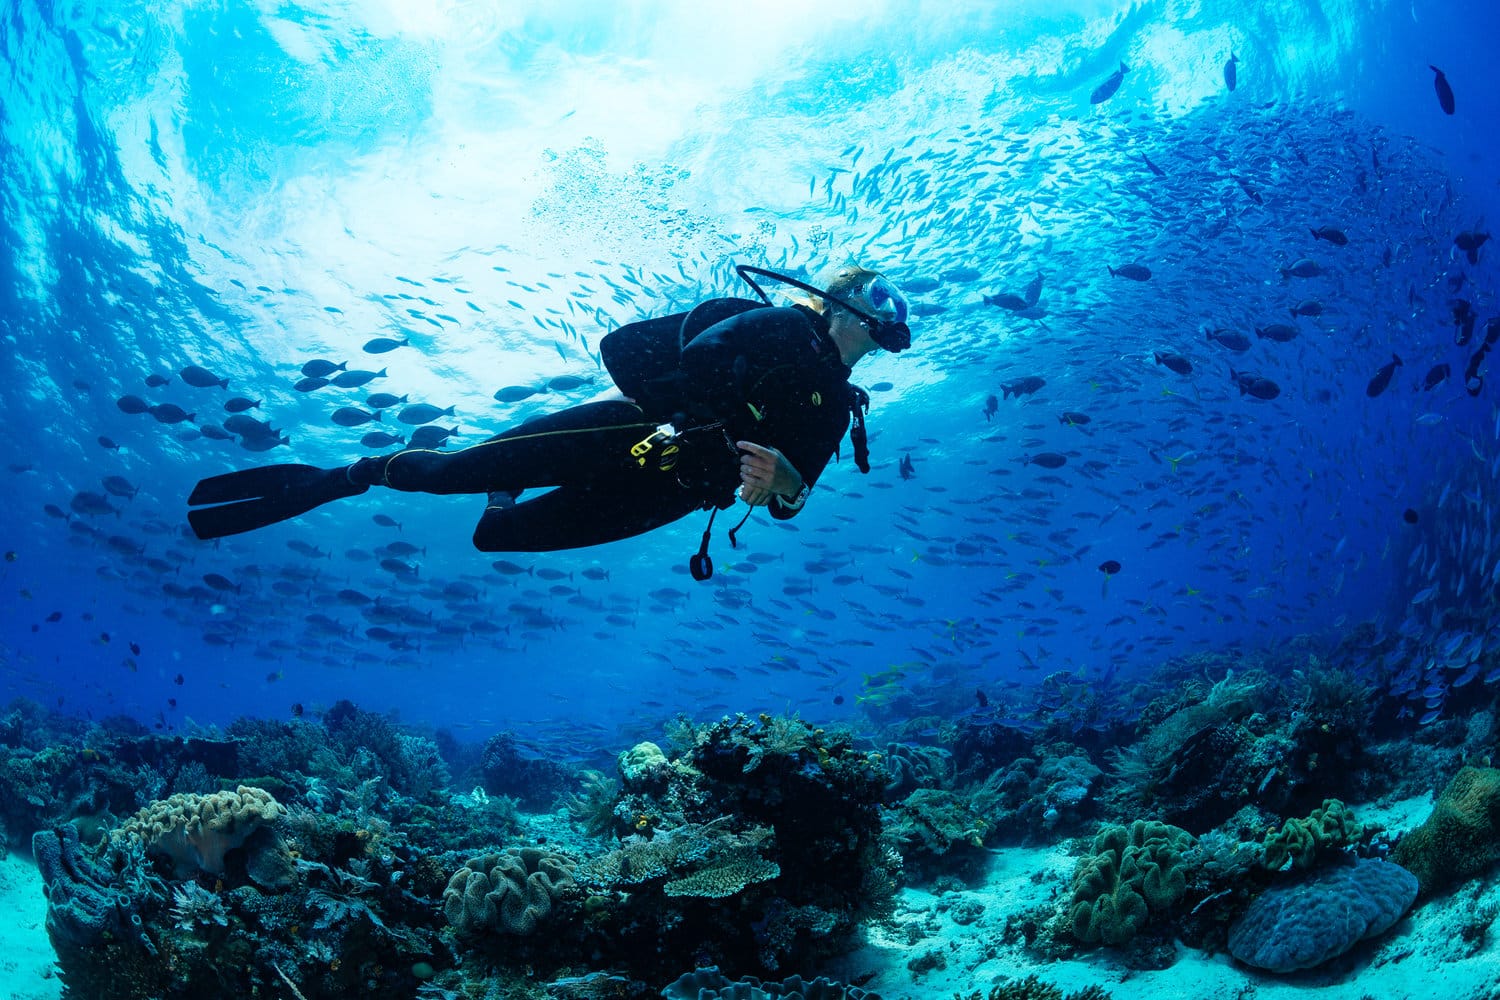 Dive Through a 7,000-Foot Underwater Wall in the Turks & Caicos